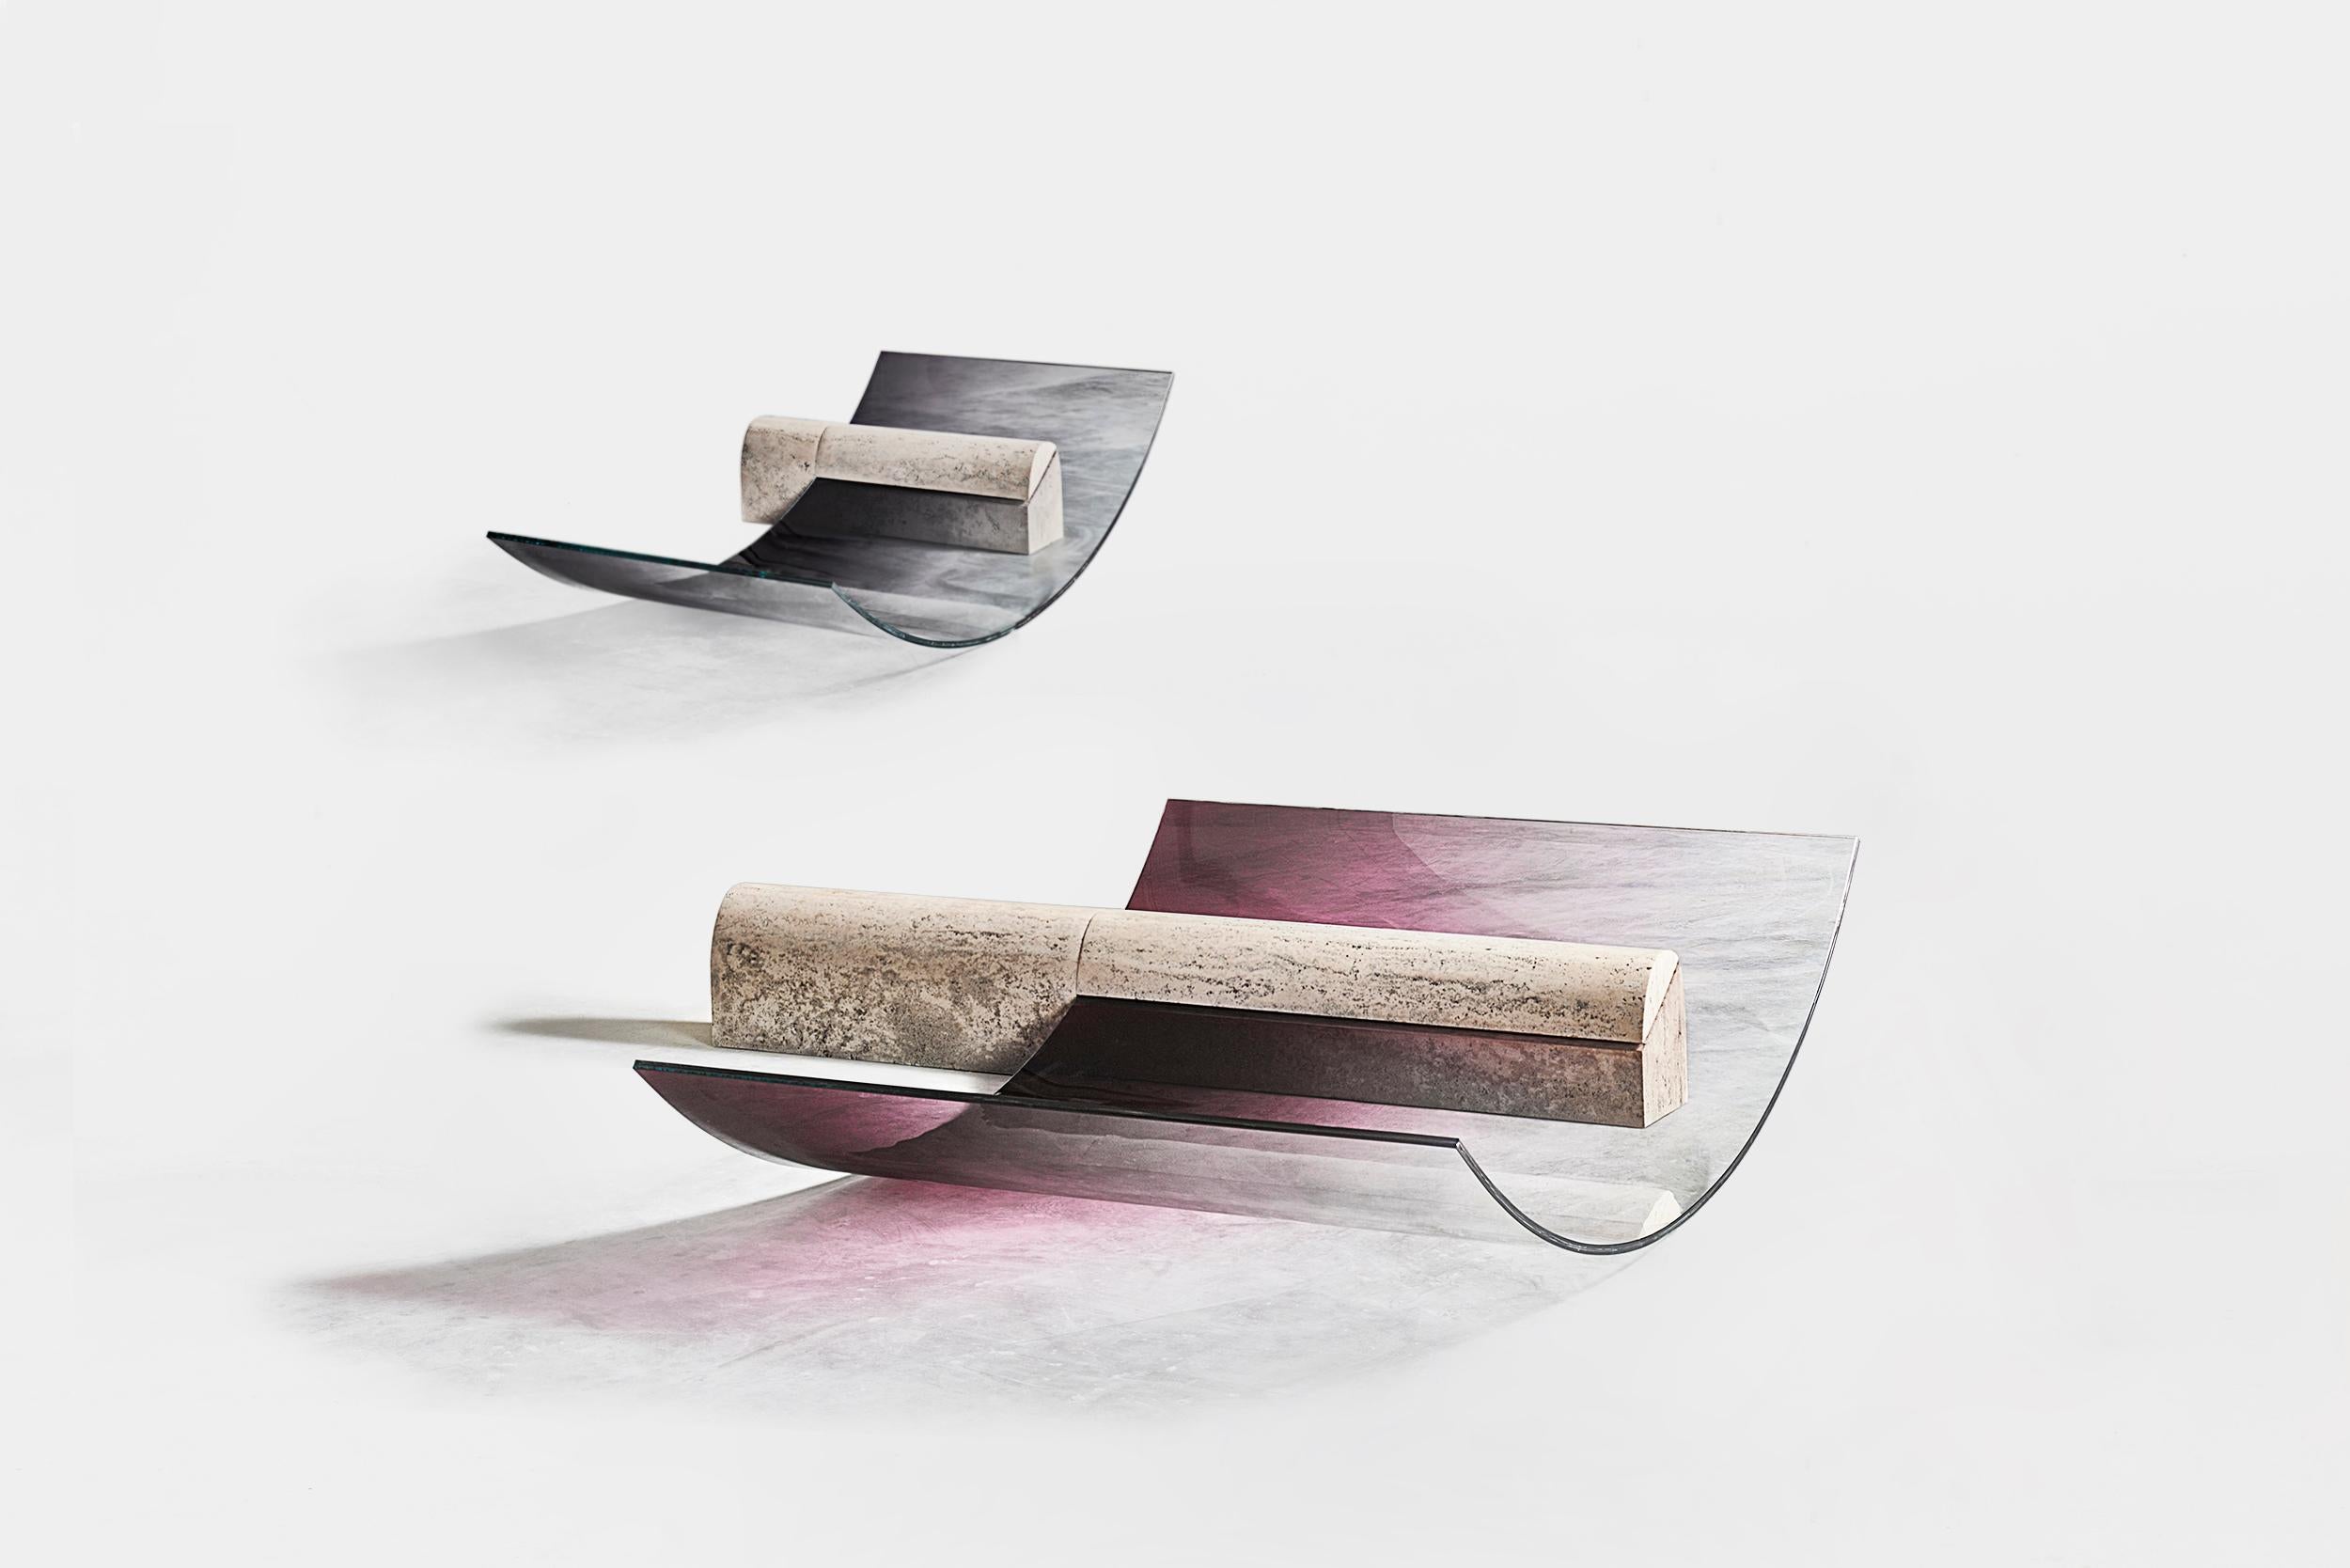 Sabine Marcelis 
Double chaise longue
From the series “No Fear of Glass”
Manufactured by Sabine Marcelis
Produced in exclusive for SIDE GALLERY, Barcelona 
Rotterdam, The Netherlands 2019
Layered curved glass, Travertine

Measurements
202